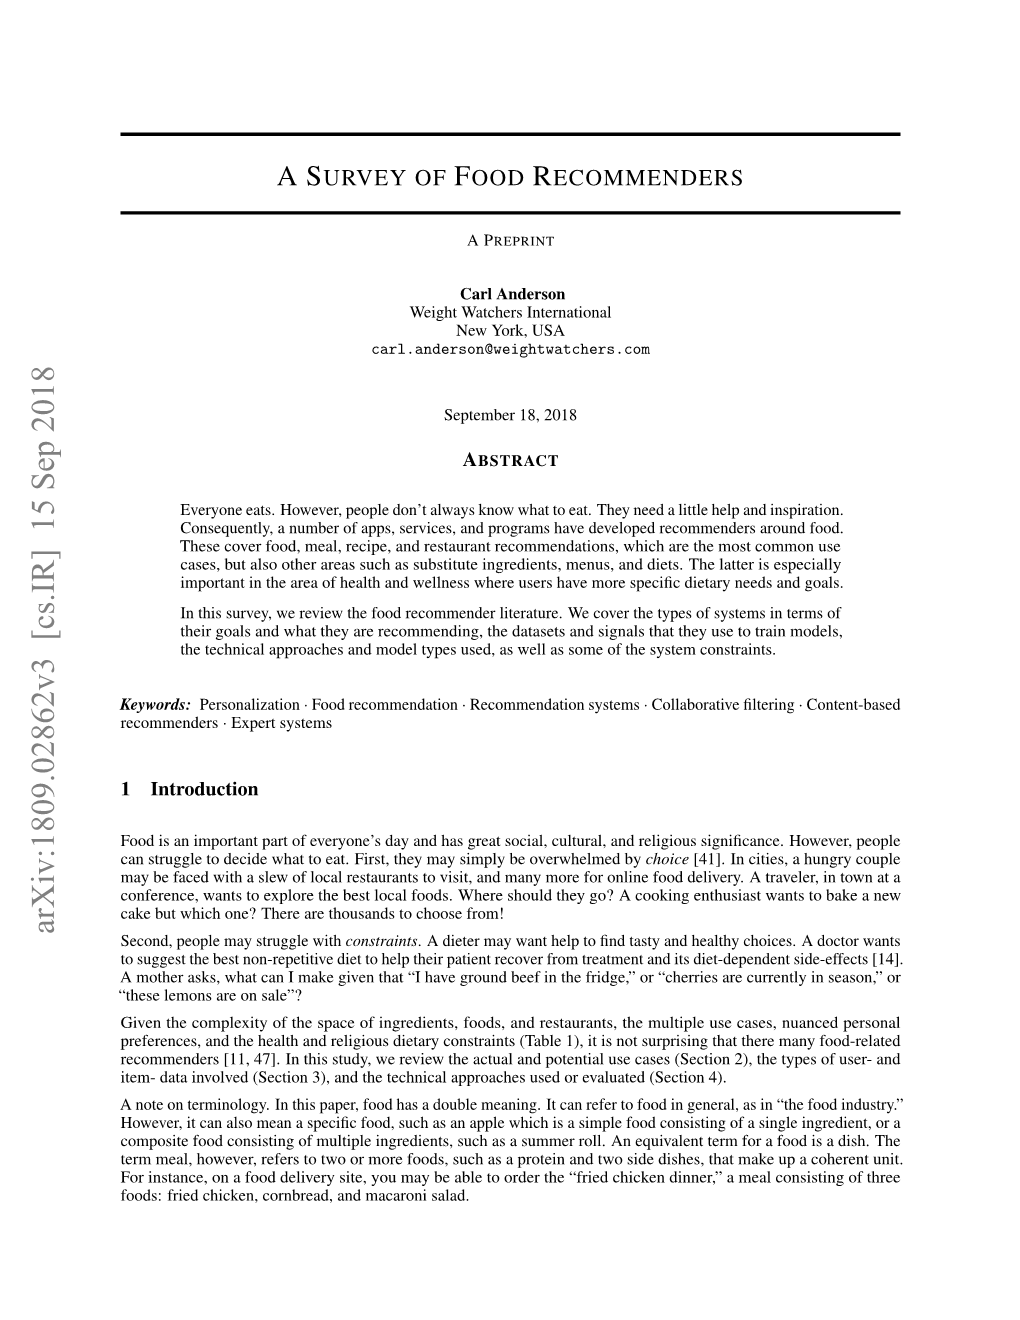 A Survey of Food Recommenders